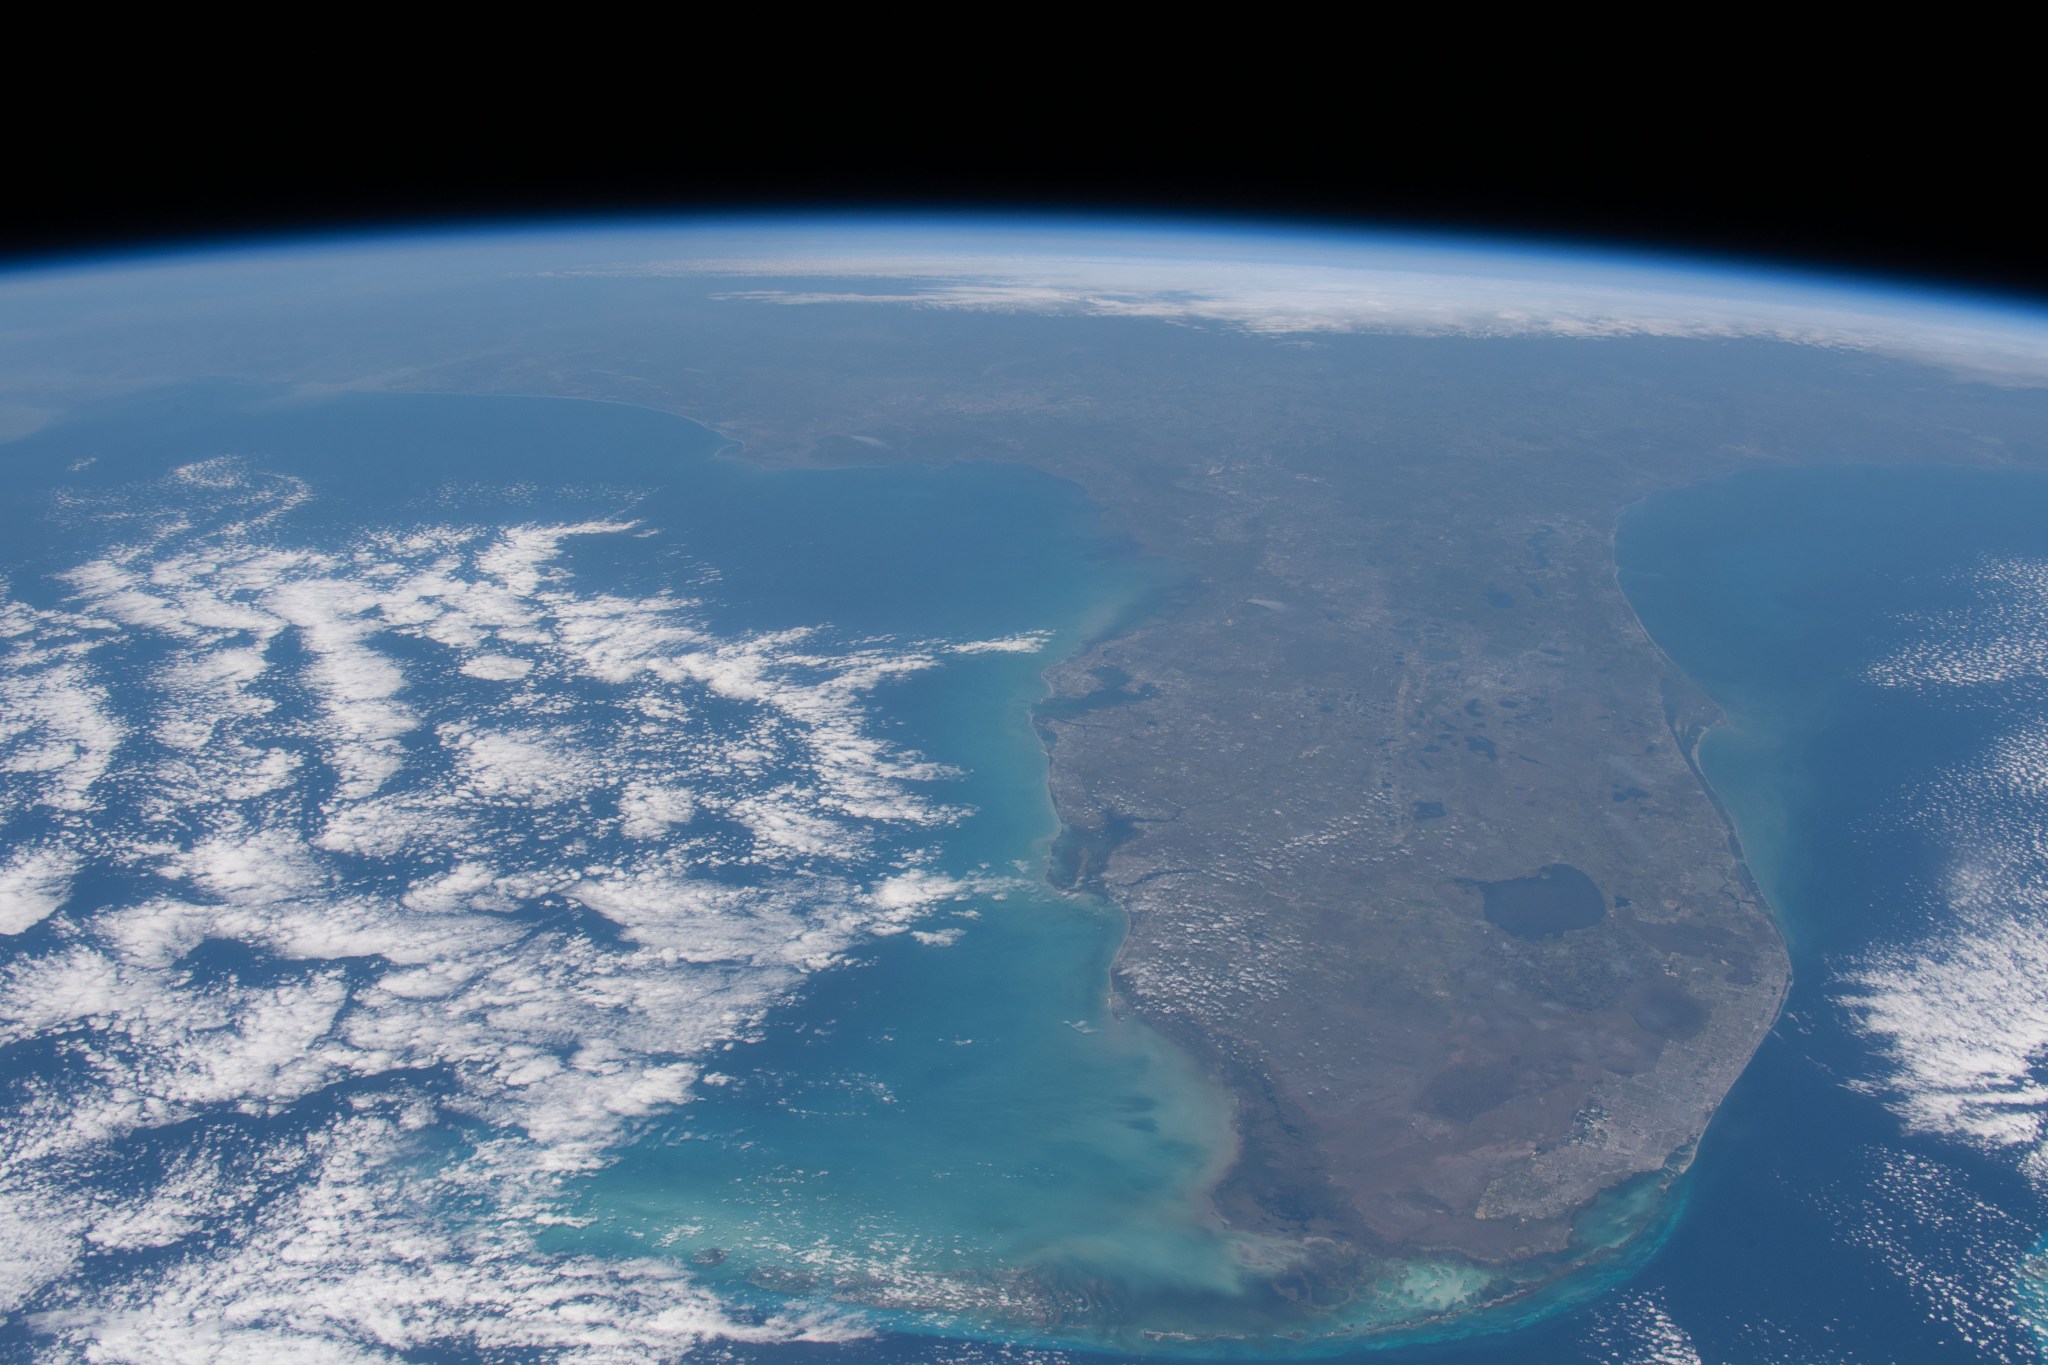 iss062e069492 (Feb. 28, 2020) --- The Florida peninsula is pictured looking northward as the International Space Station orbited 263 miles above the Caribbean Sea.